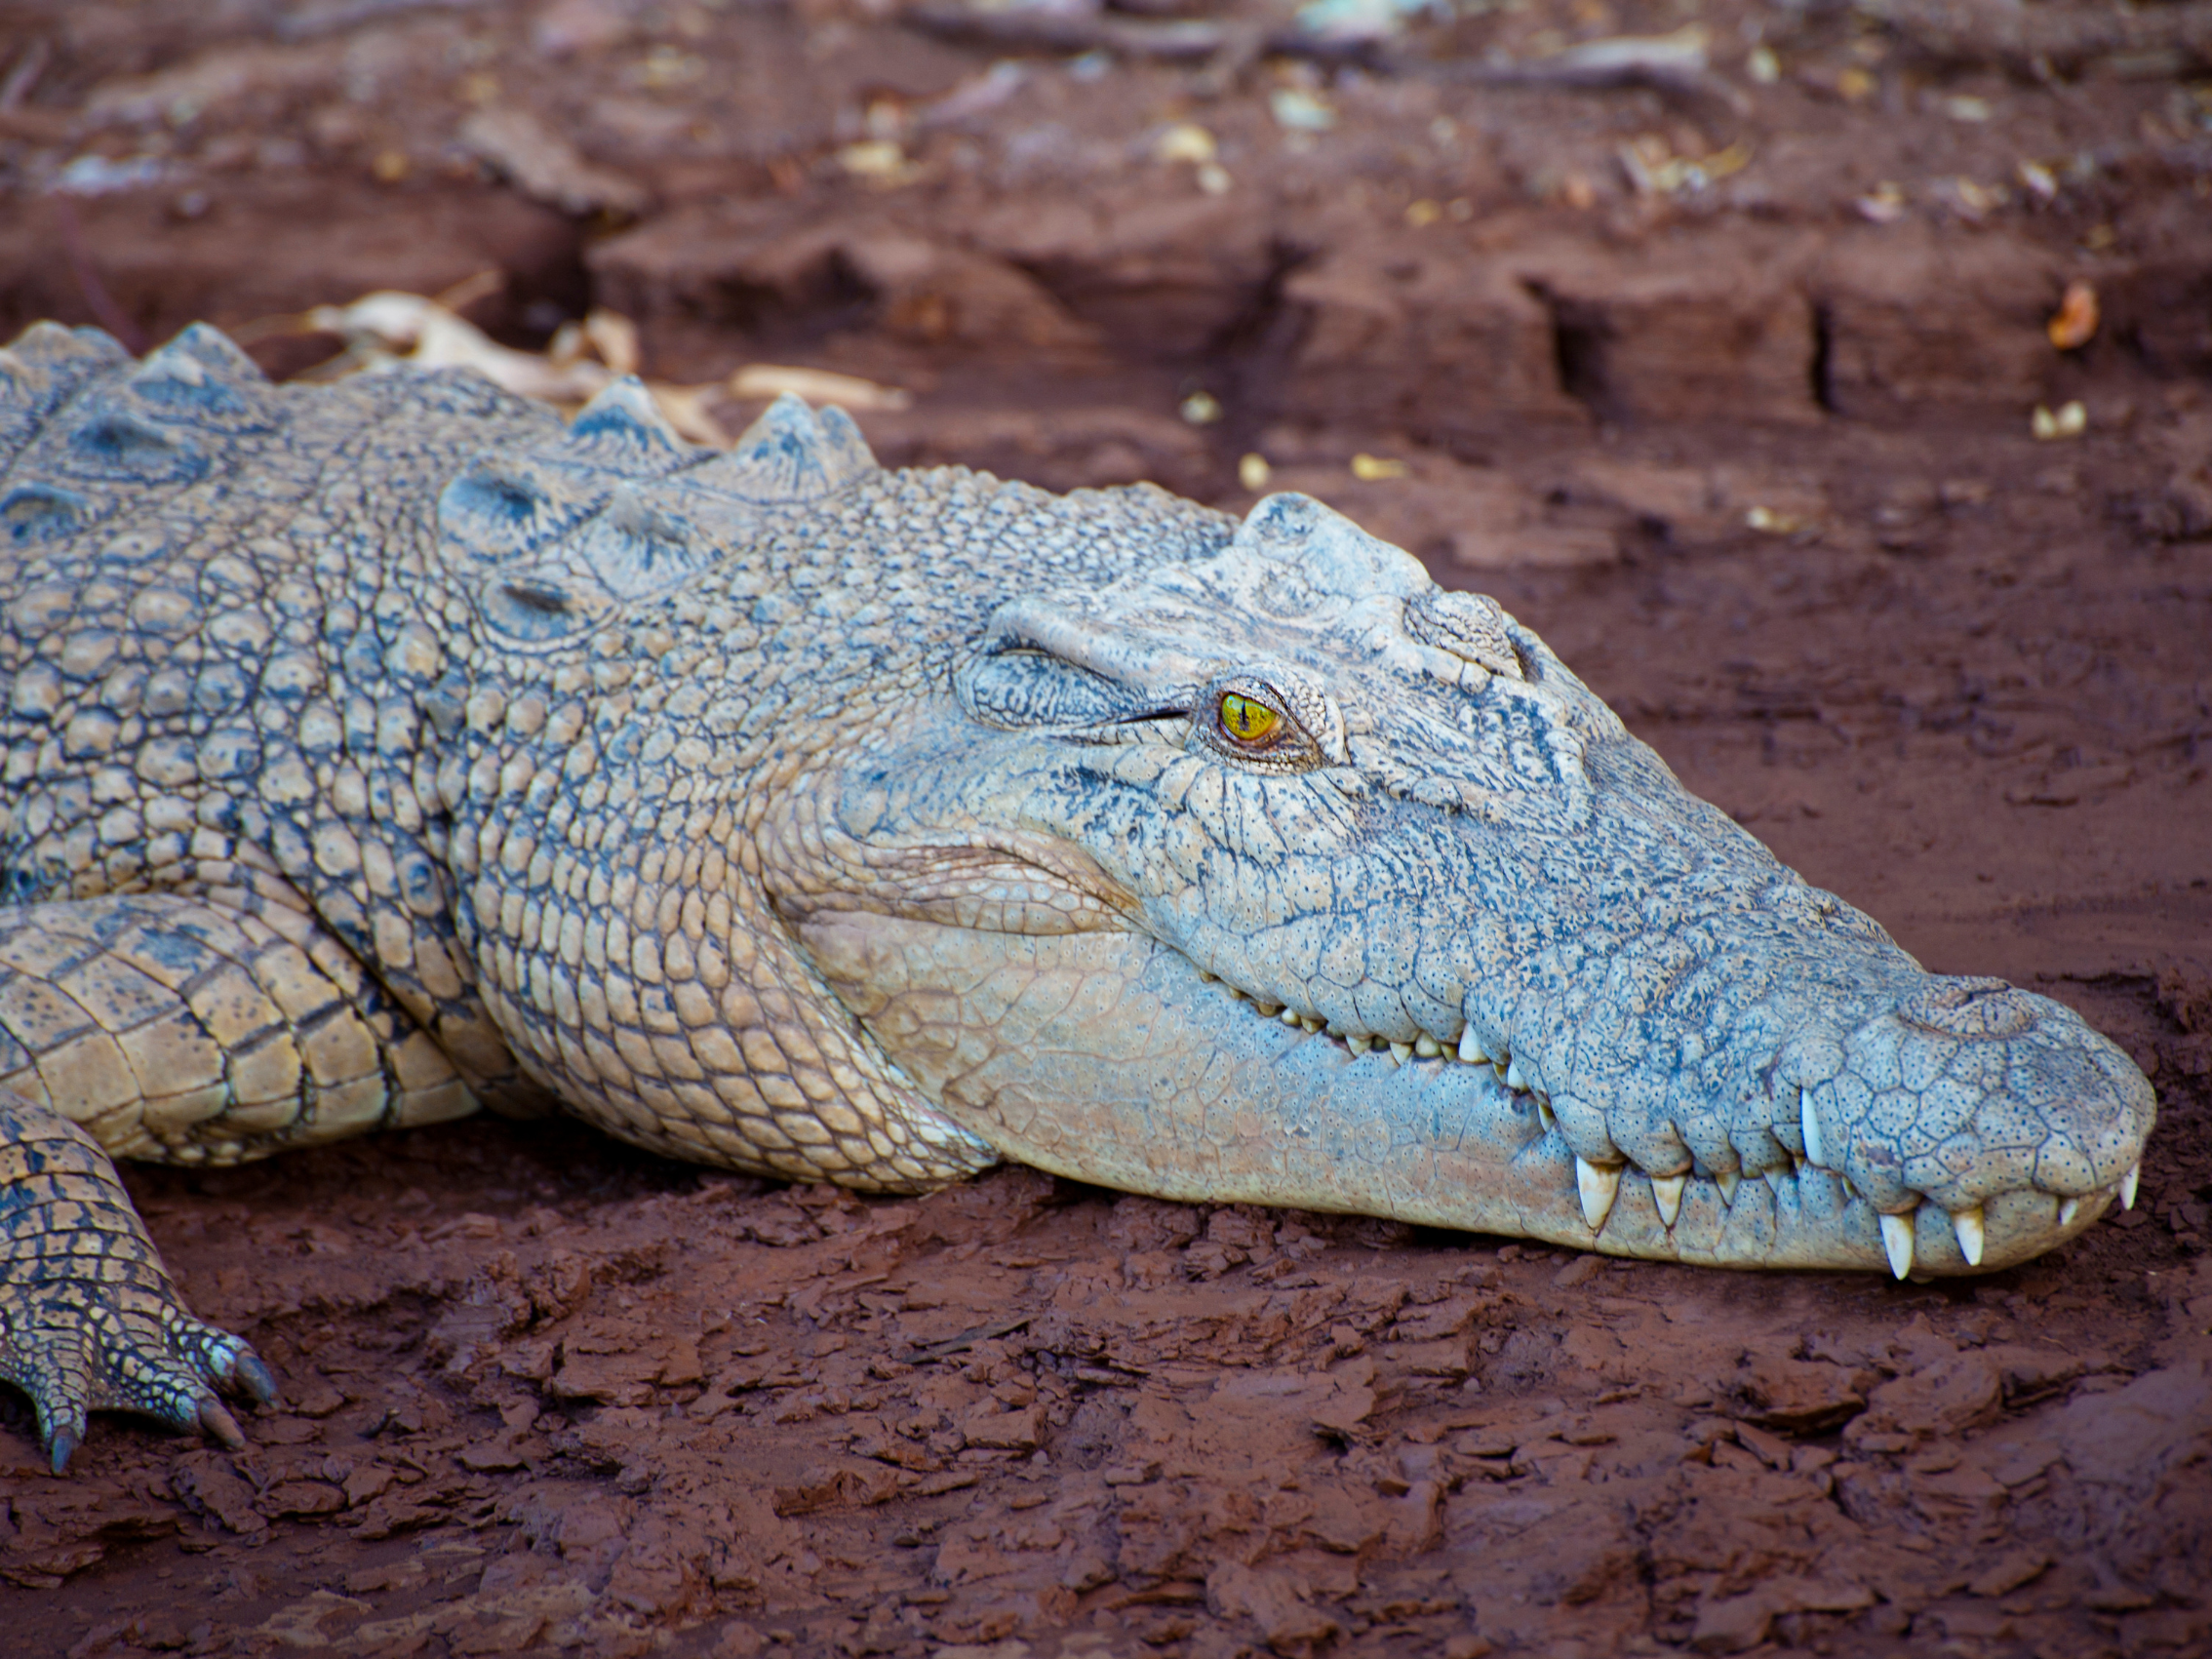 Image shows the head and foreleg of a saltwater crocodile with its mouth closed.